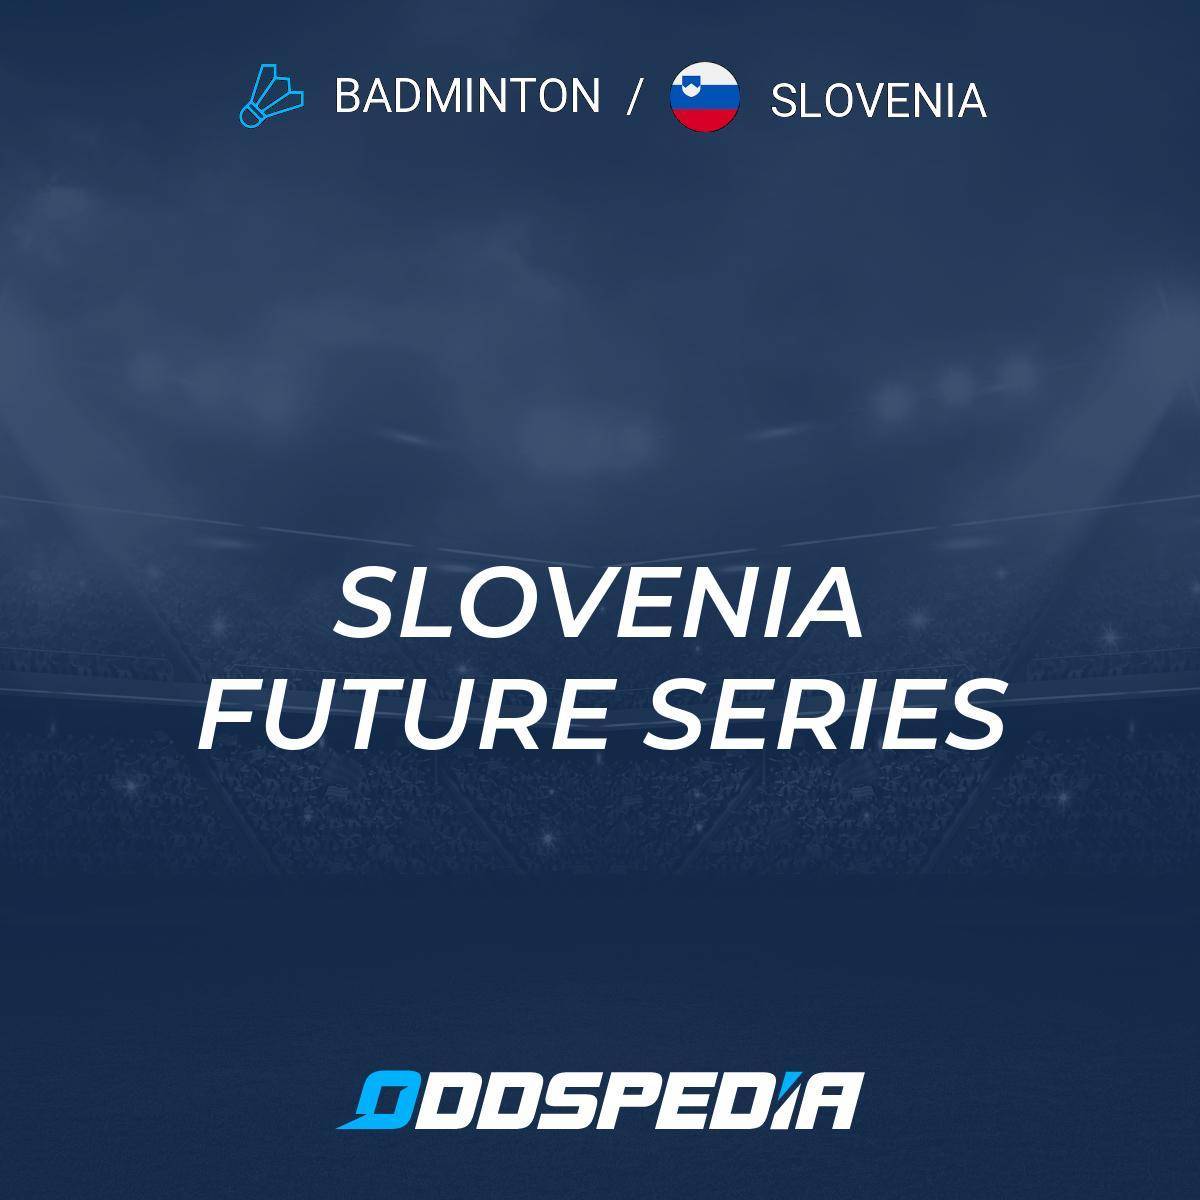 Slovenia Future Series, Doubles Live Score, Result and Schedule